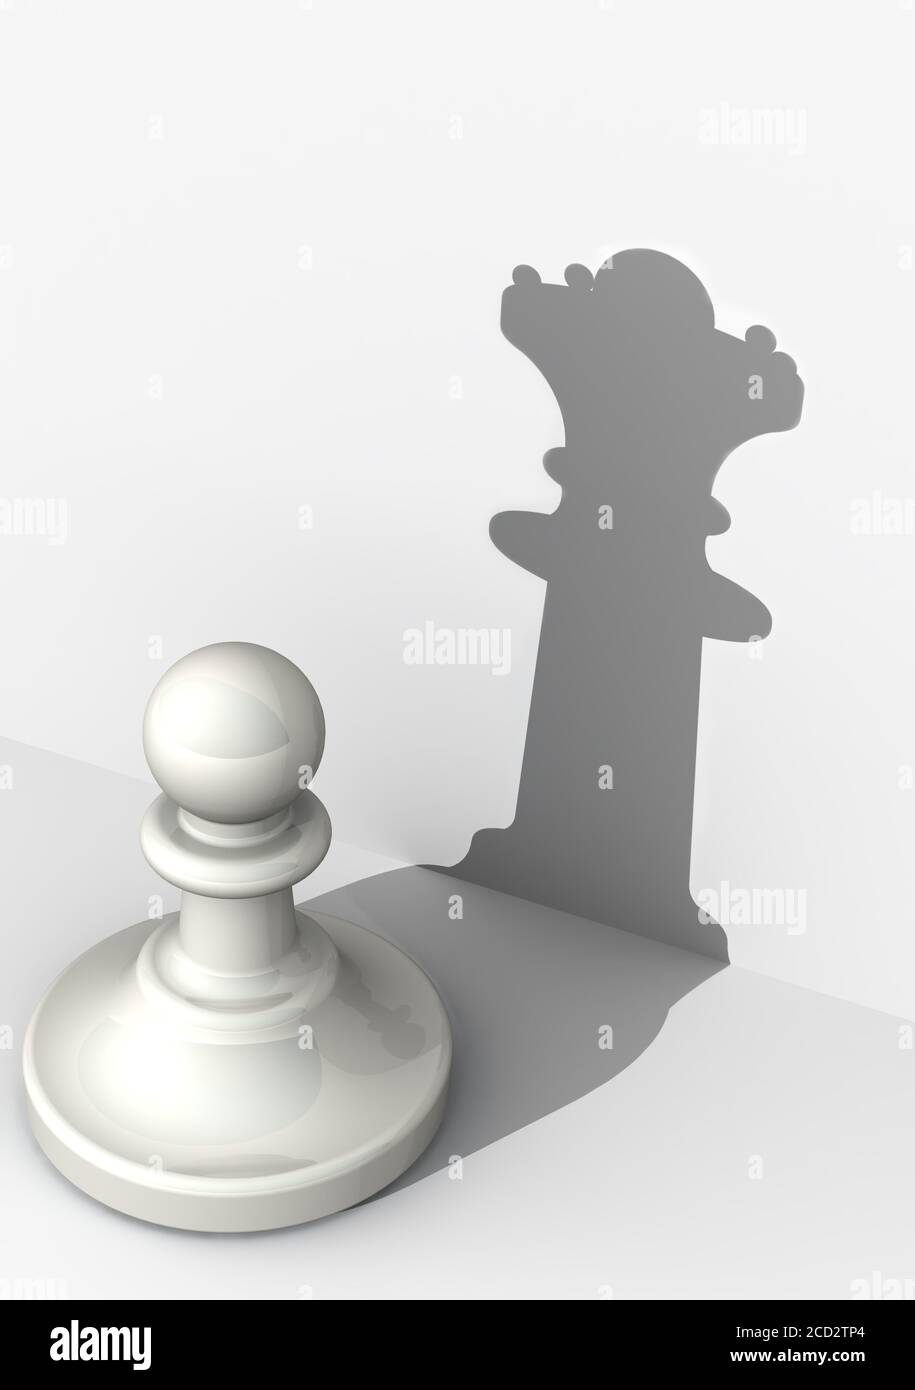 Pawn with high self-esteem. Chess piece. White pawn with the shadow of queen. The concept of very high self-esteem. 3D illustration Stock Photo